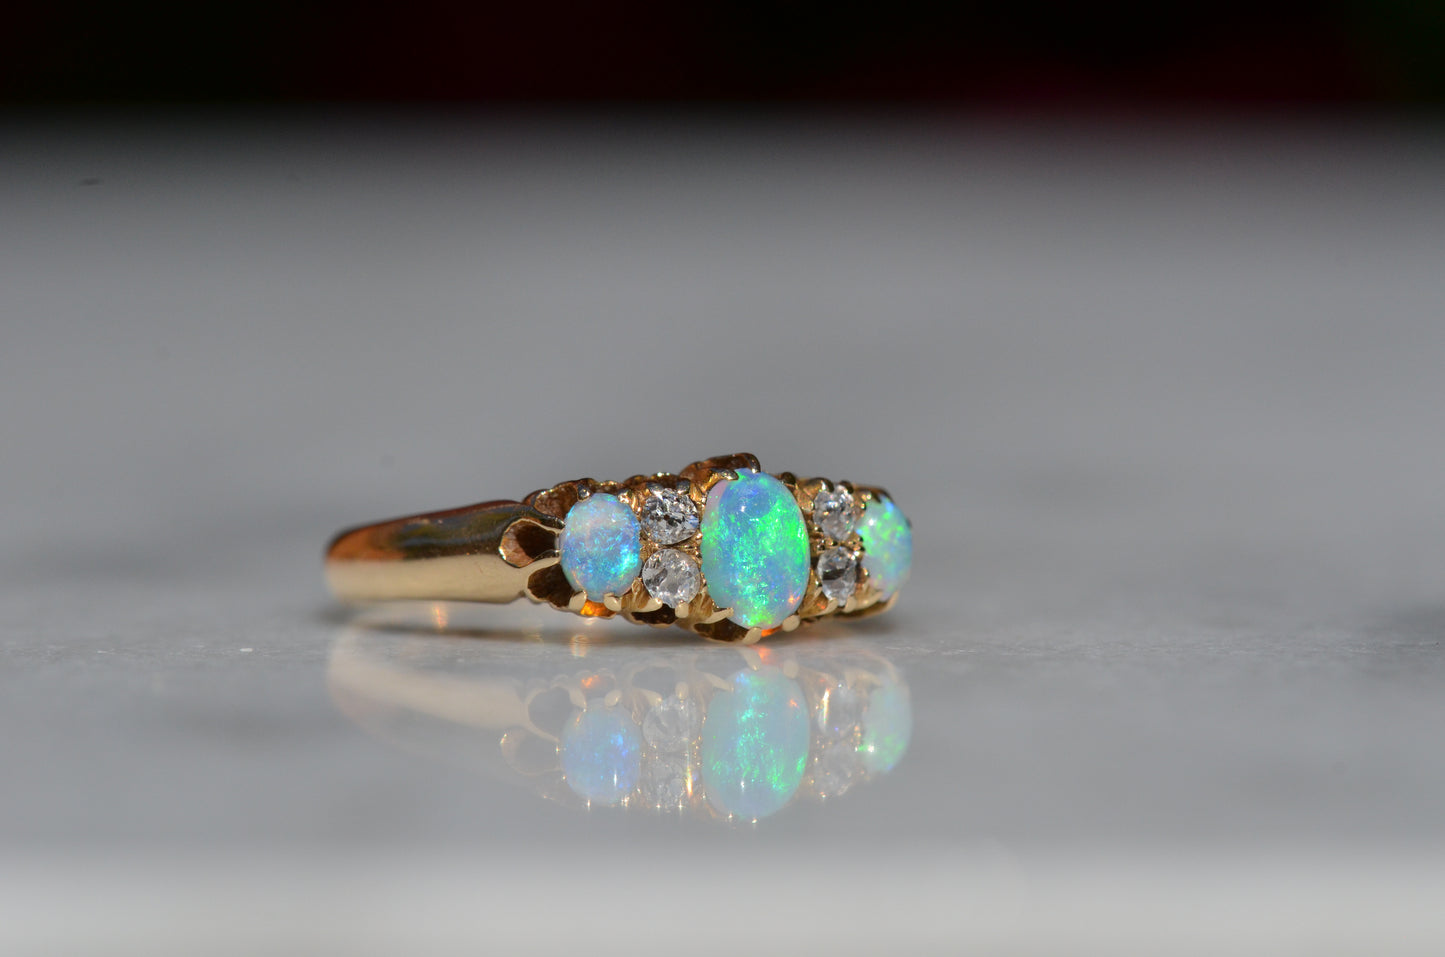 A closely-cropped macro of the Victorian ring, showcasing the strong green and blue play of color in the opals with a hint of violet and orange. The ring is photographed turned slightly to the right, so that the unique facet patterns of the accent diamonds are highlighted.